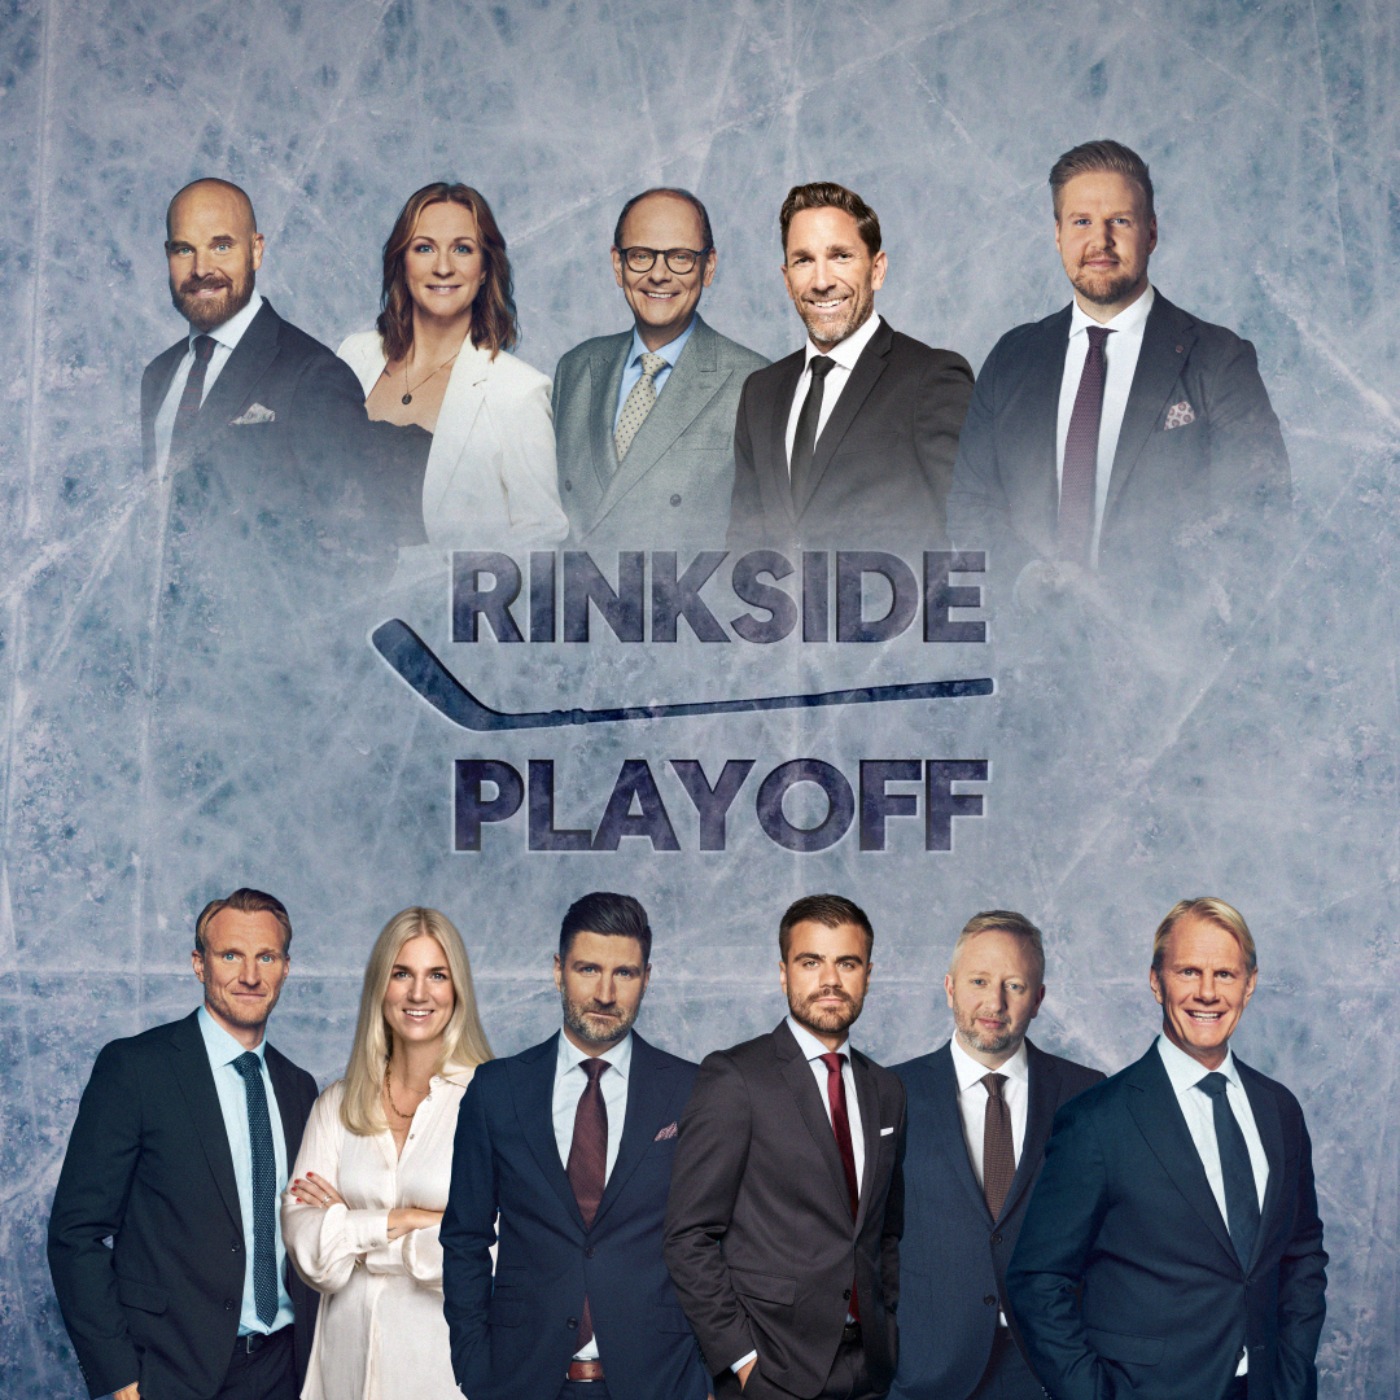 Rinkside Playoff - Everyone Has a Plan Until They Get Punched in the Mouth